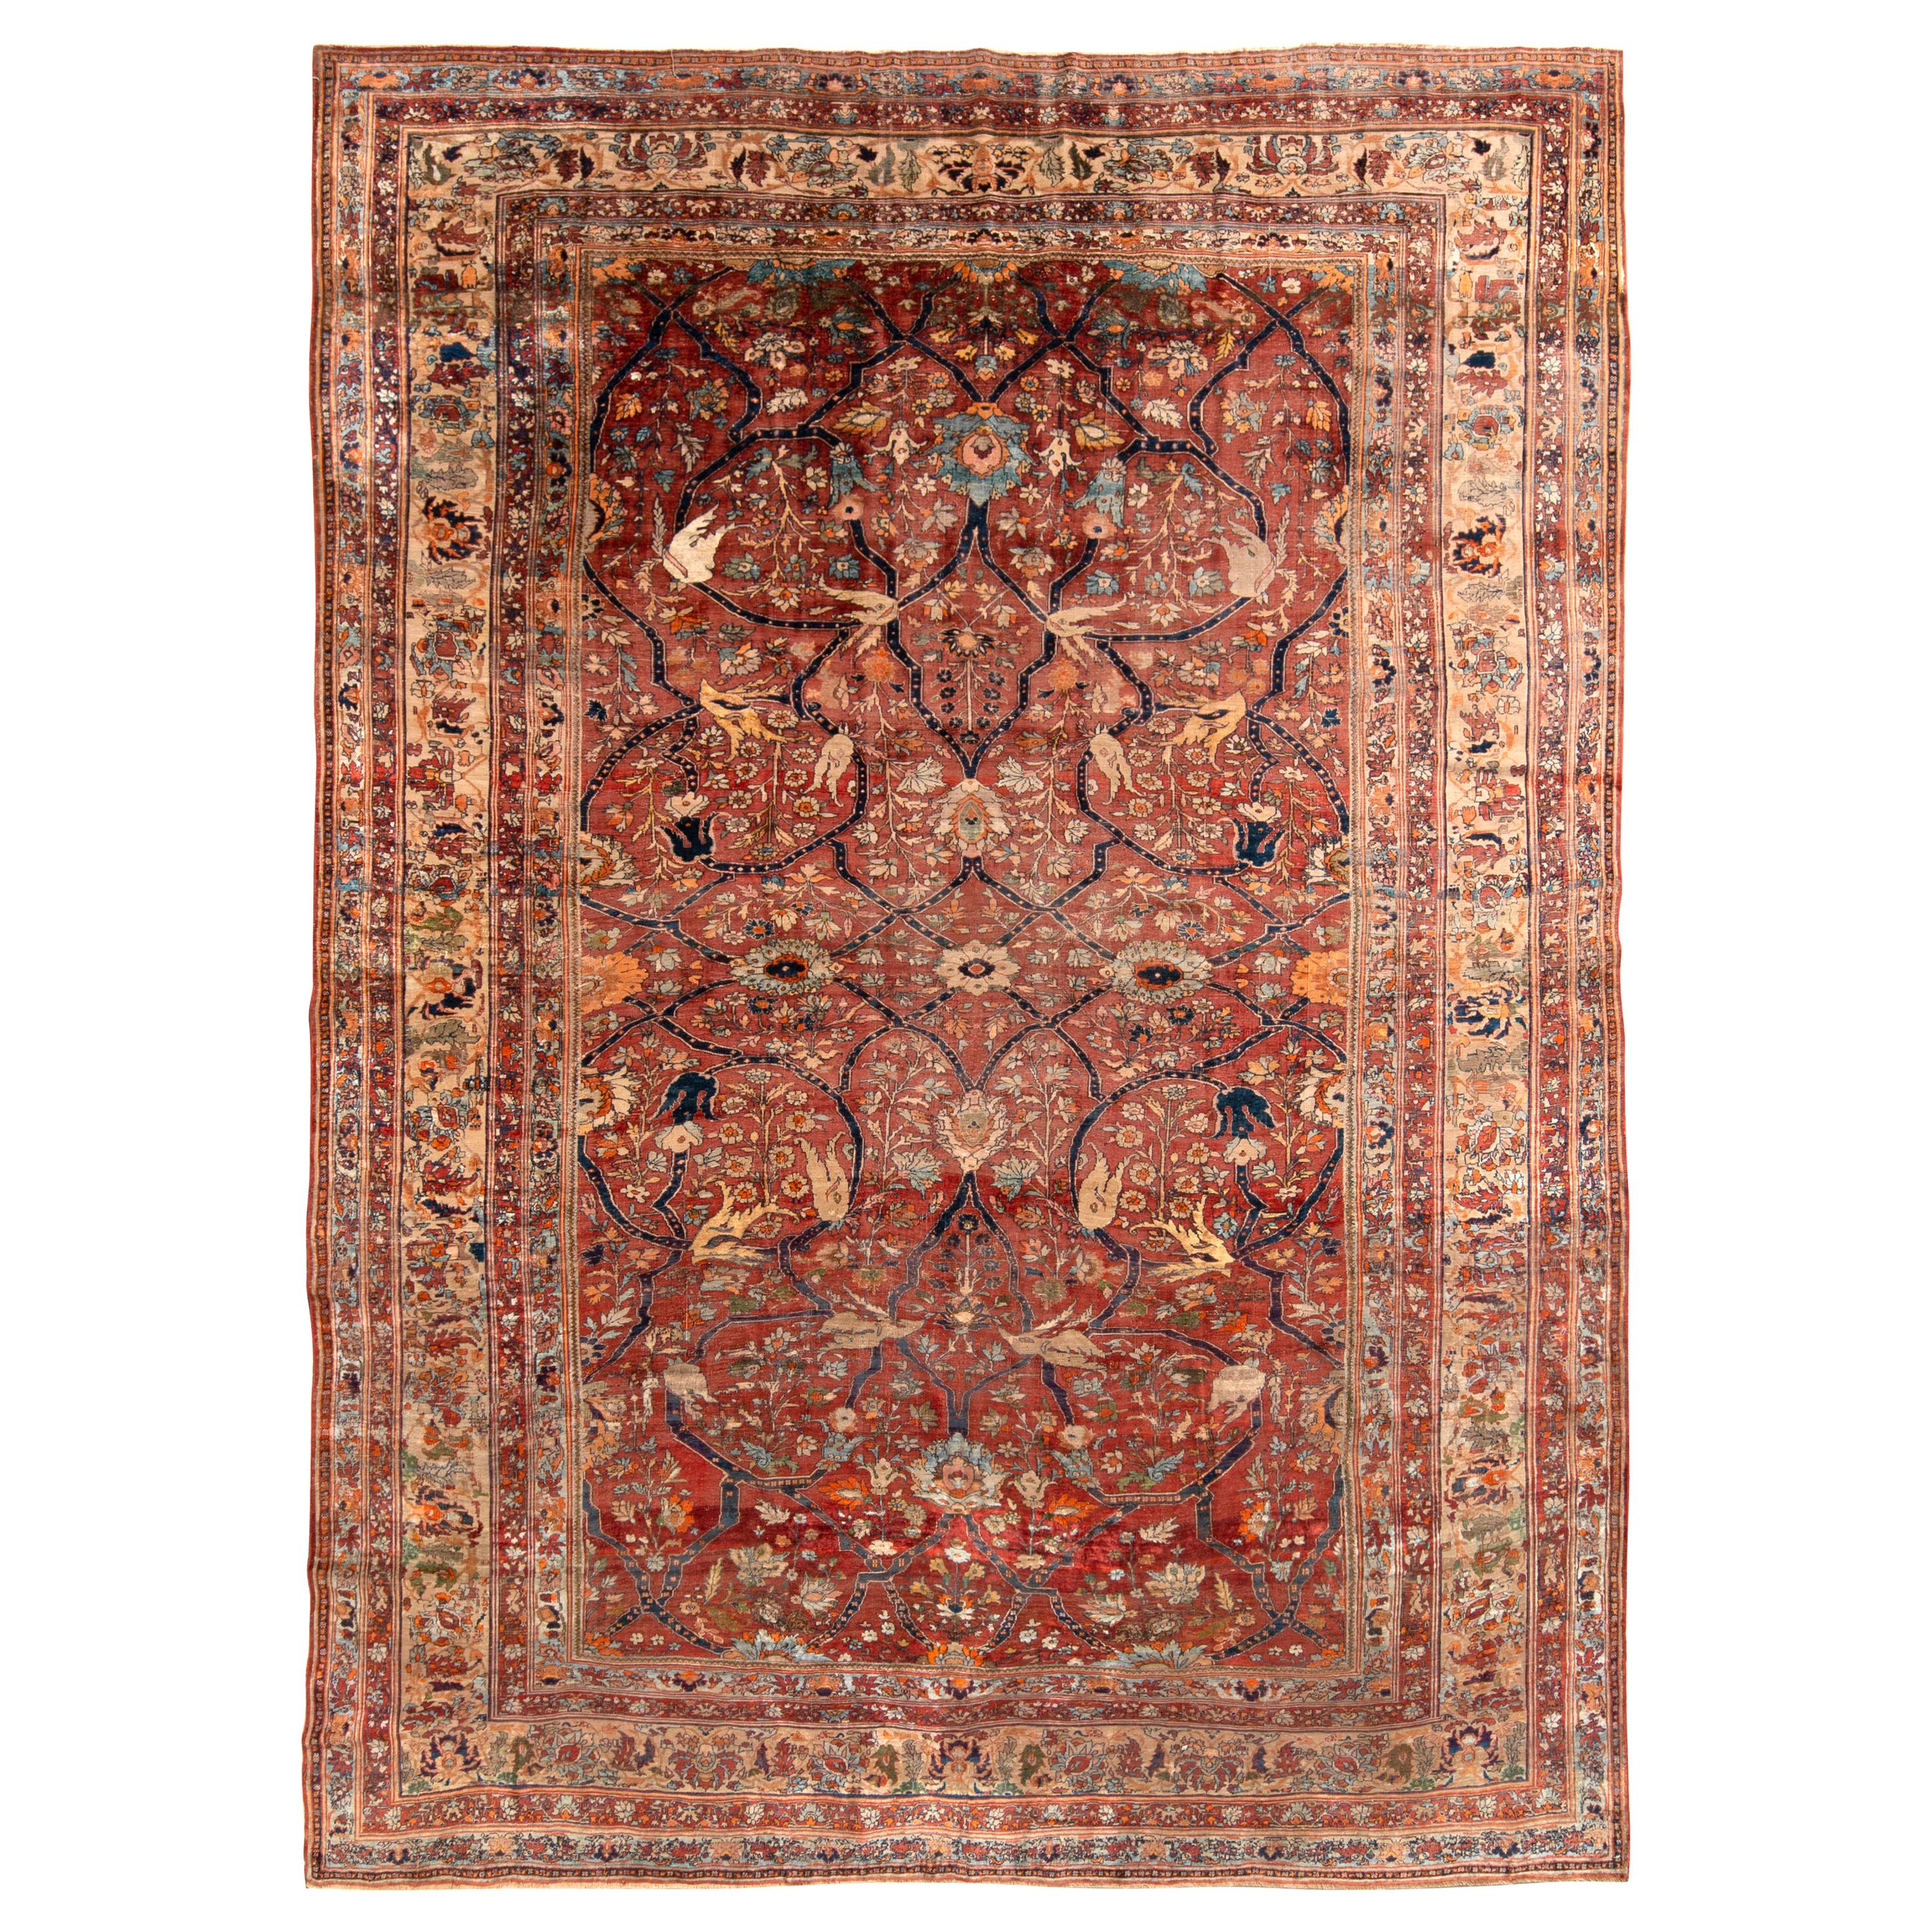 Hand-Knotted Antique Heriz Persian Style Rug in Red Floral Pattern